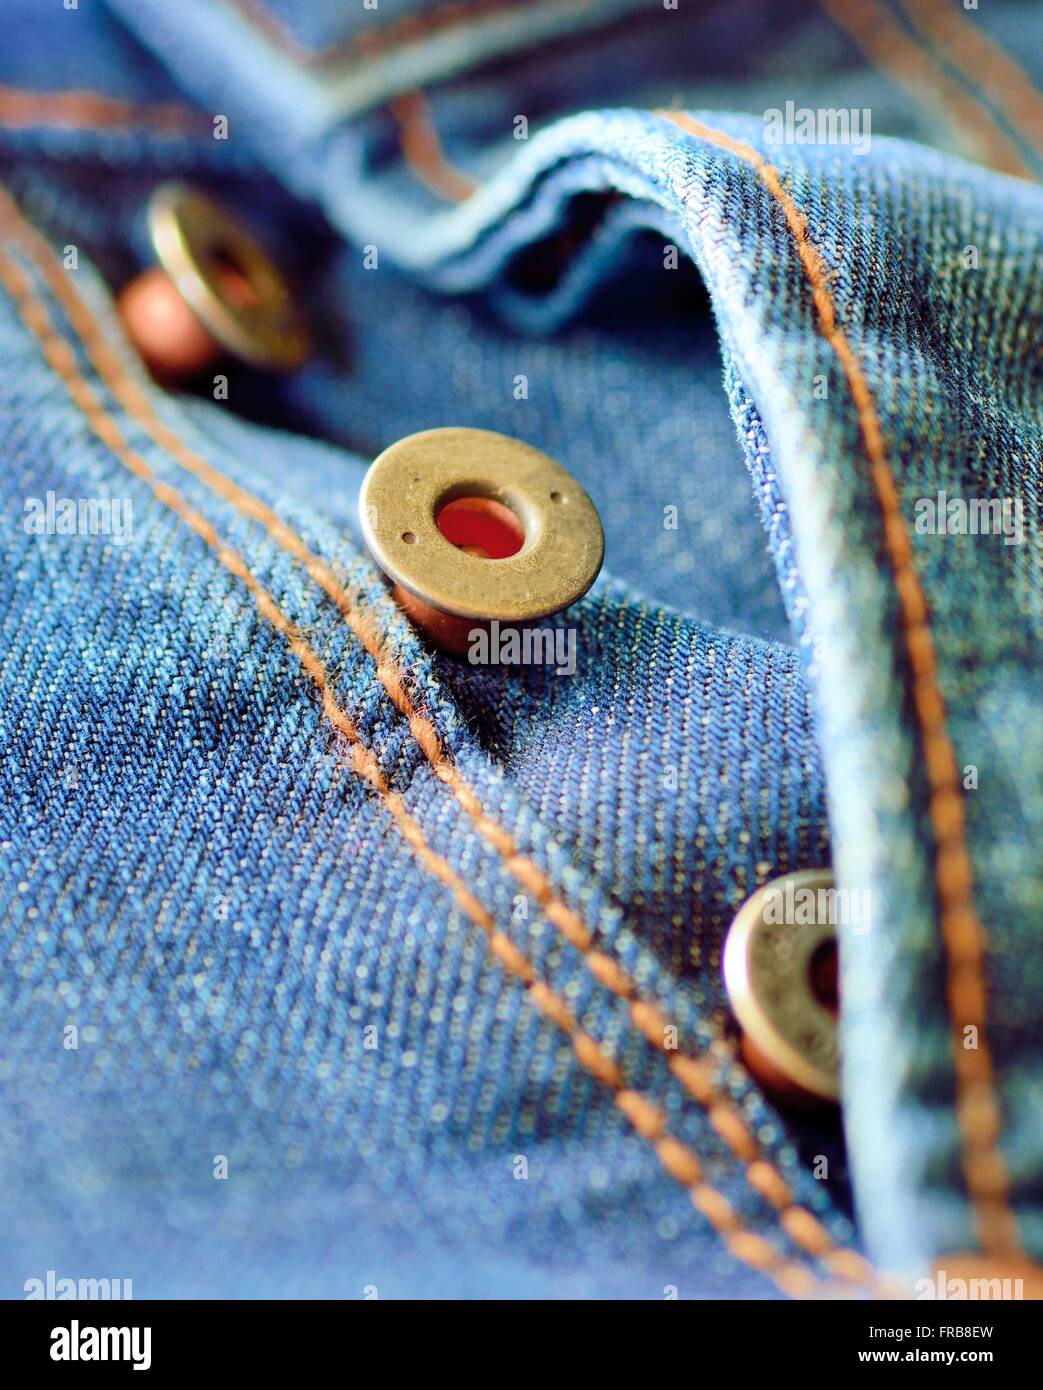 https://c8.alamy.com/comp/FRB8EW/front-piece-of-the-blue-jeans-open-buttons-fly-button-macro-jeans-FRB8EW.jpg